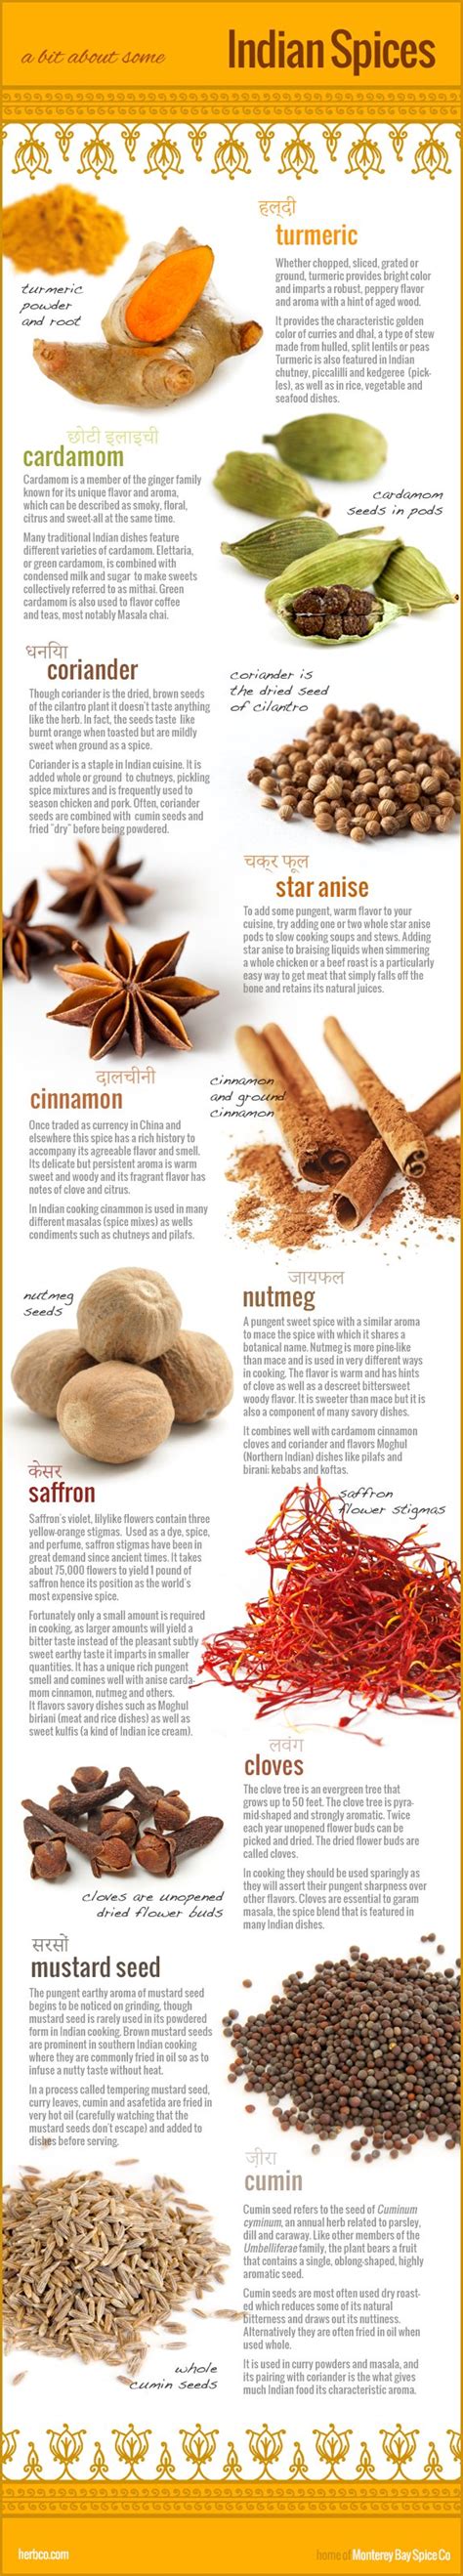 10 Most Common Spices